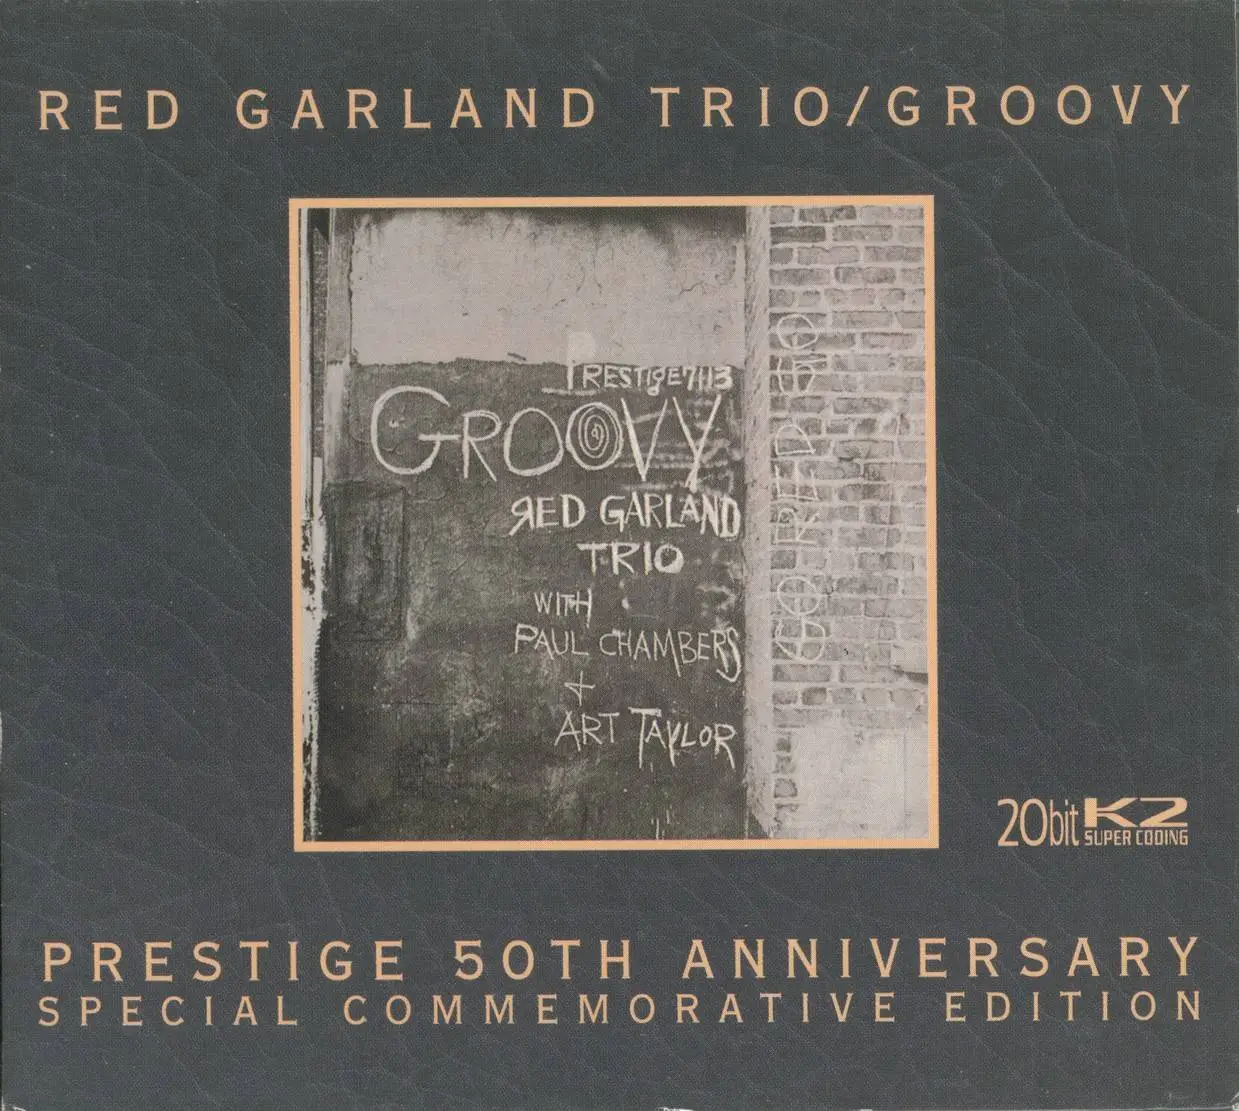 download free red garland groovy rar files